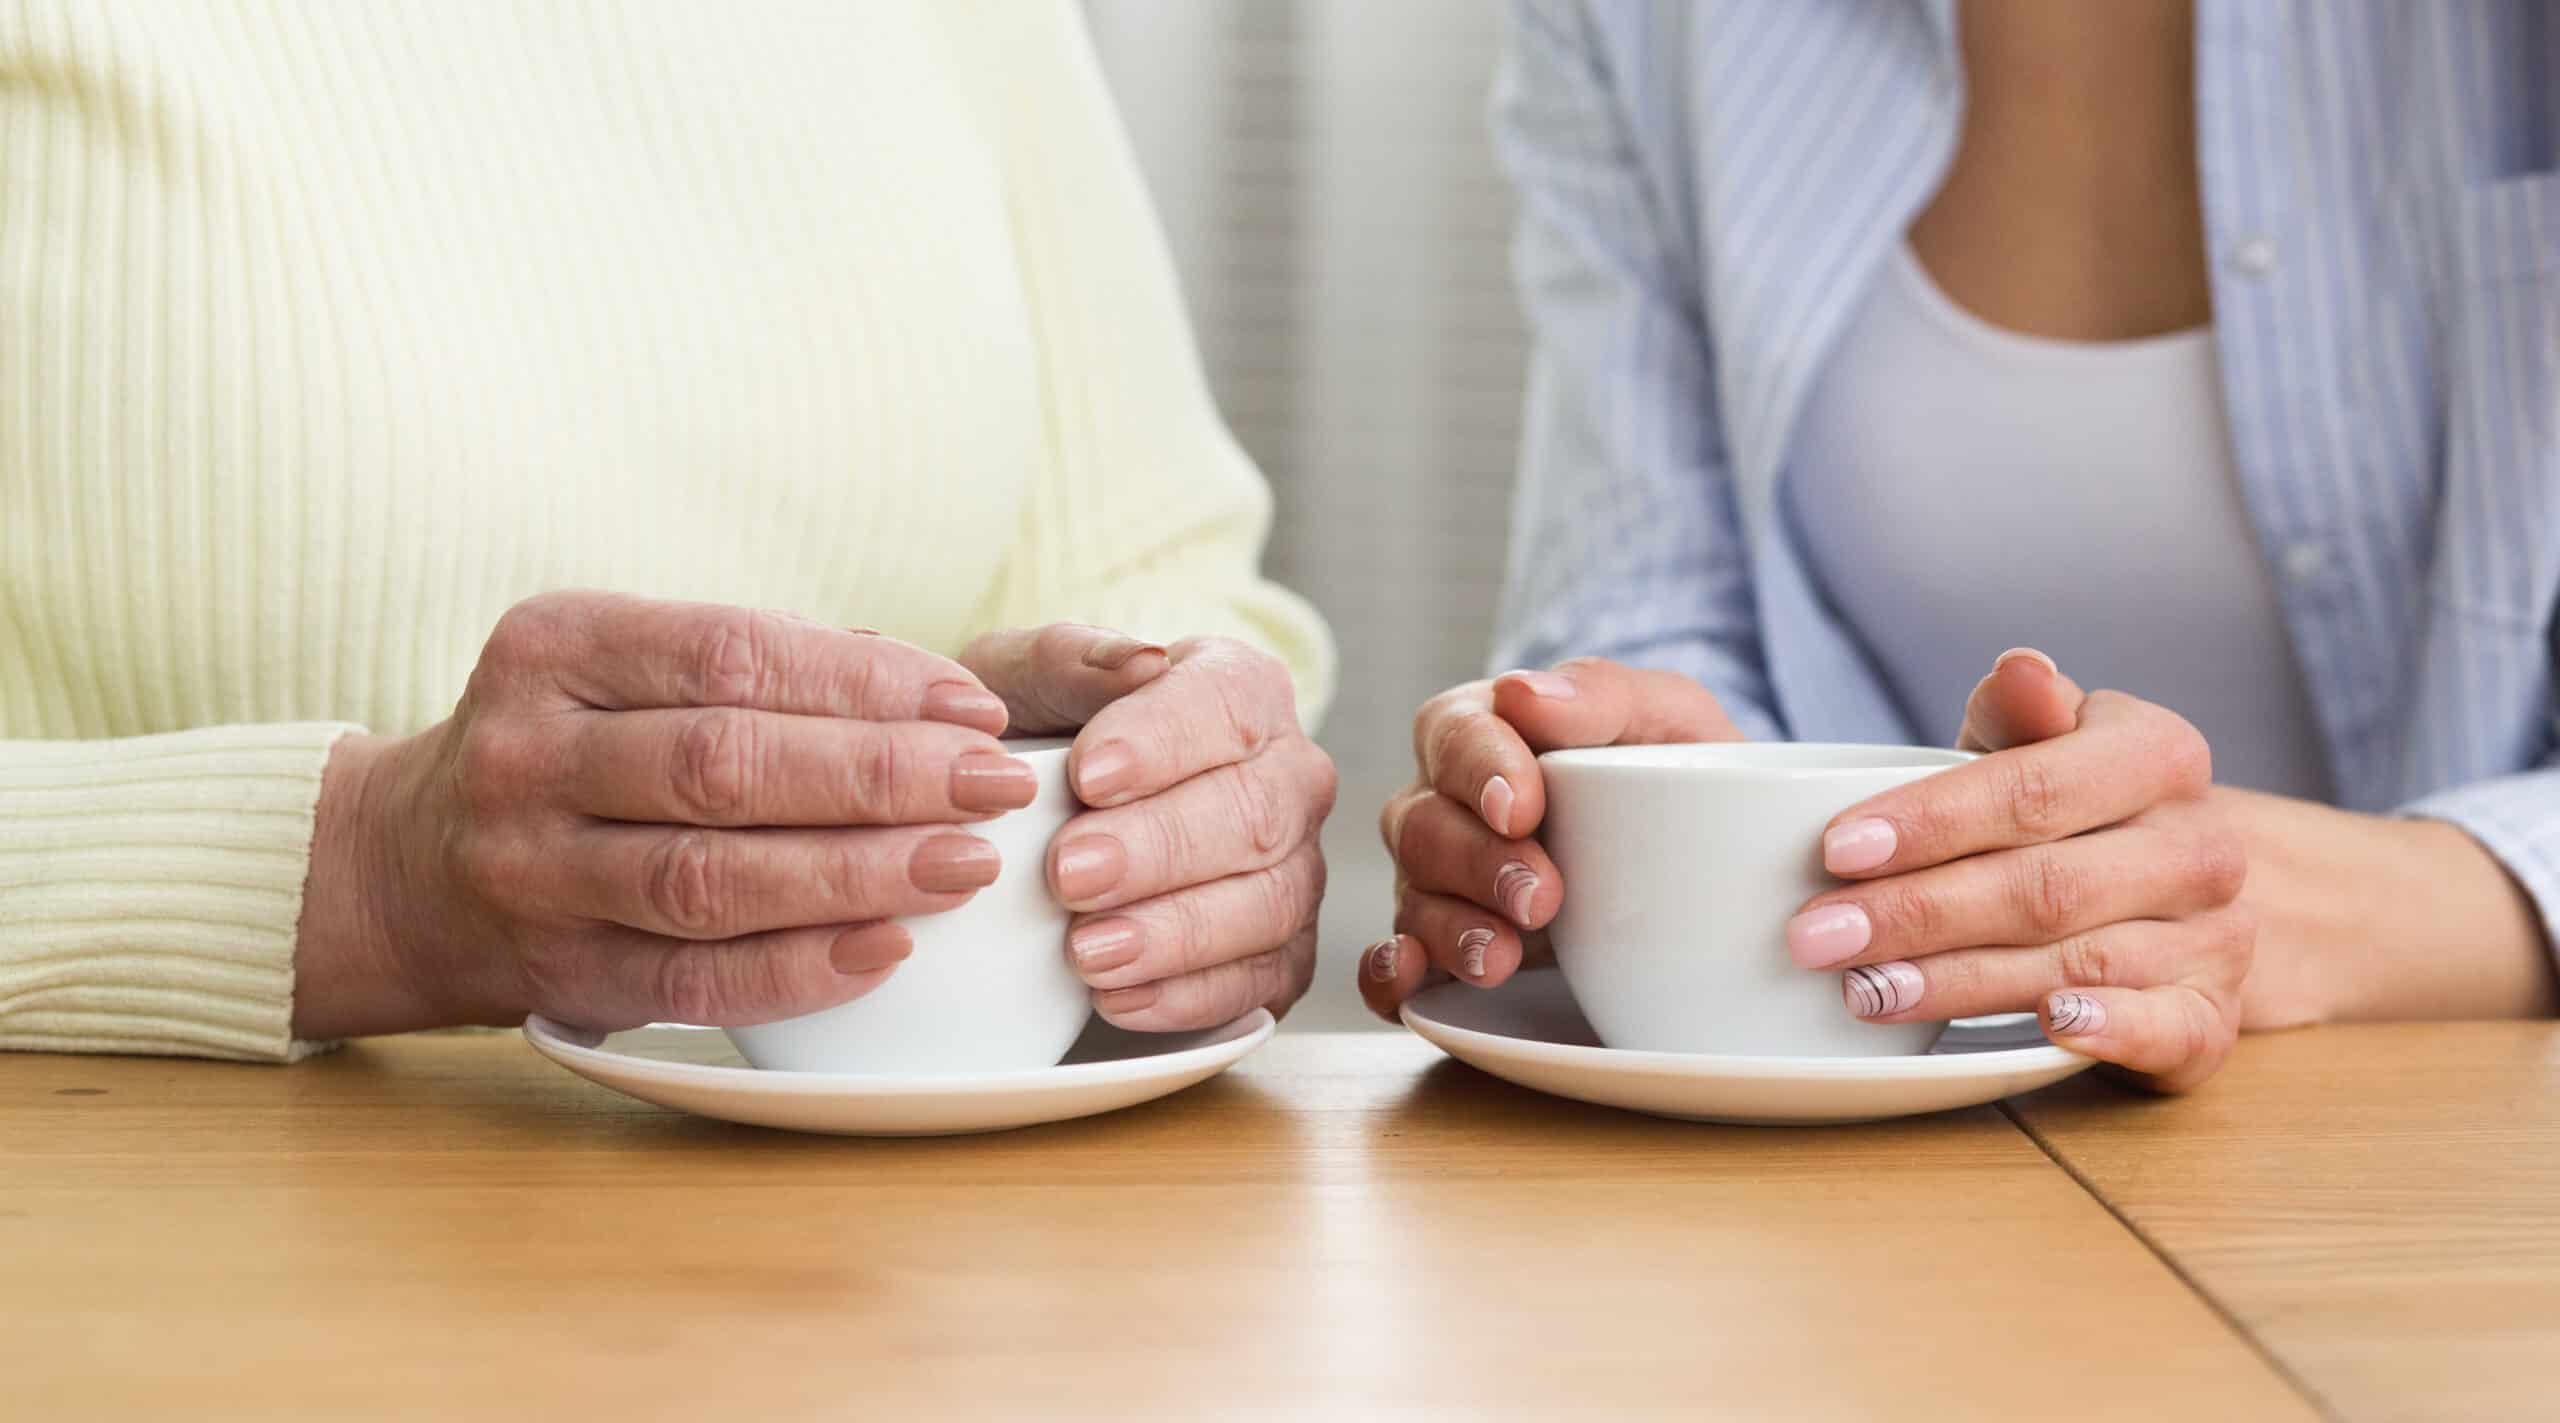 How will I know when my elderly parent can’t live alone?